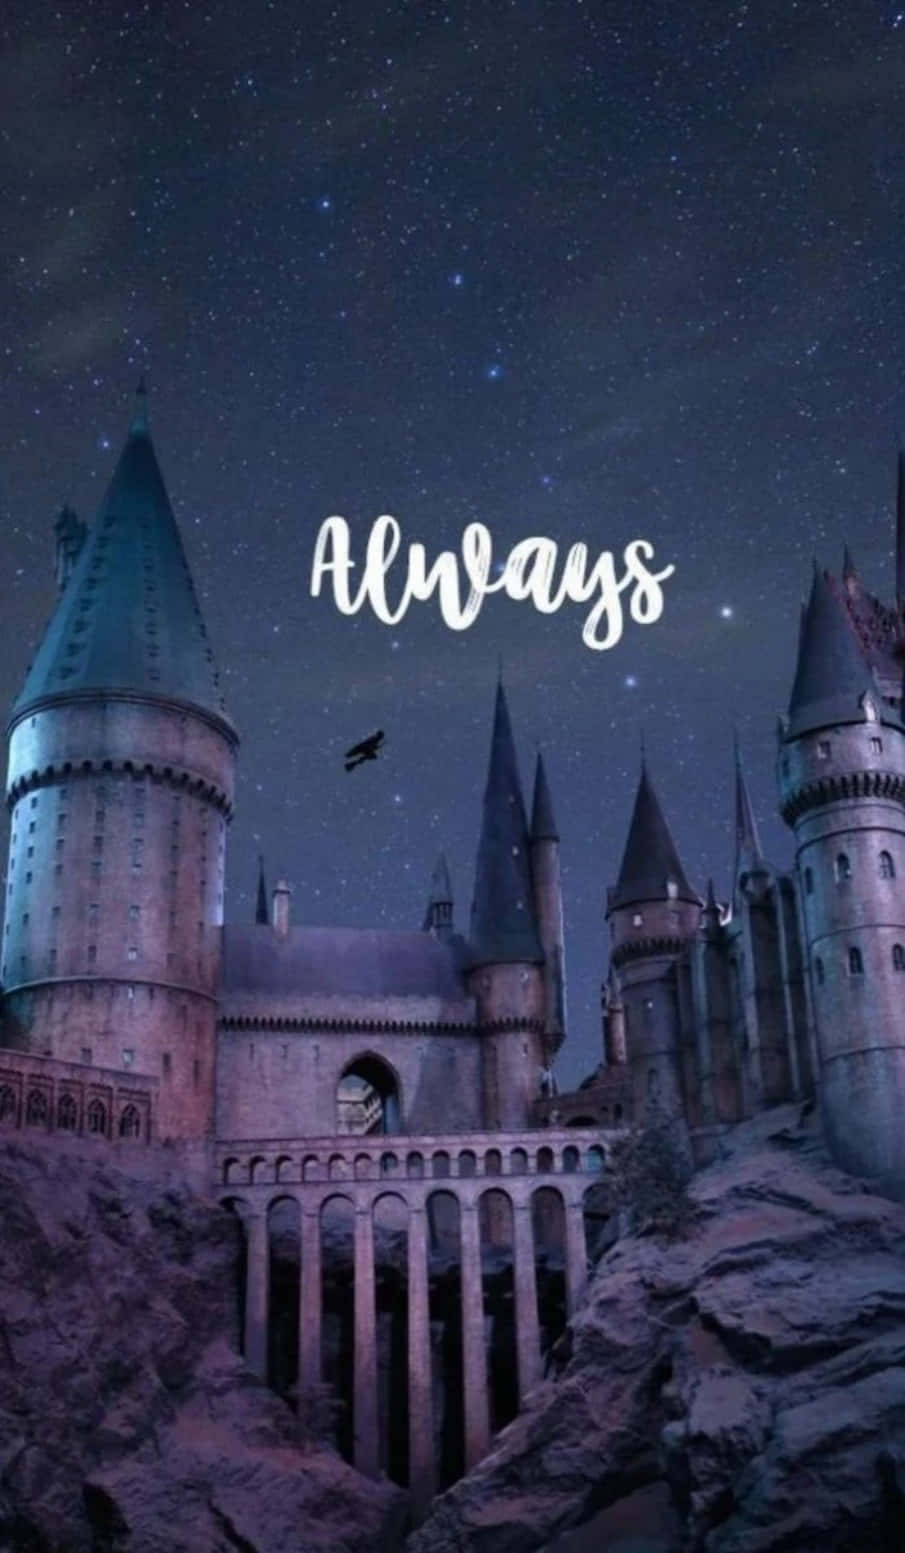 Hogwarts School of Witchcraft and Wizardry - Where Magic Comes to Life